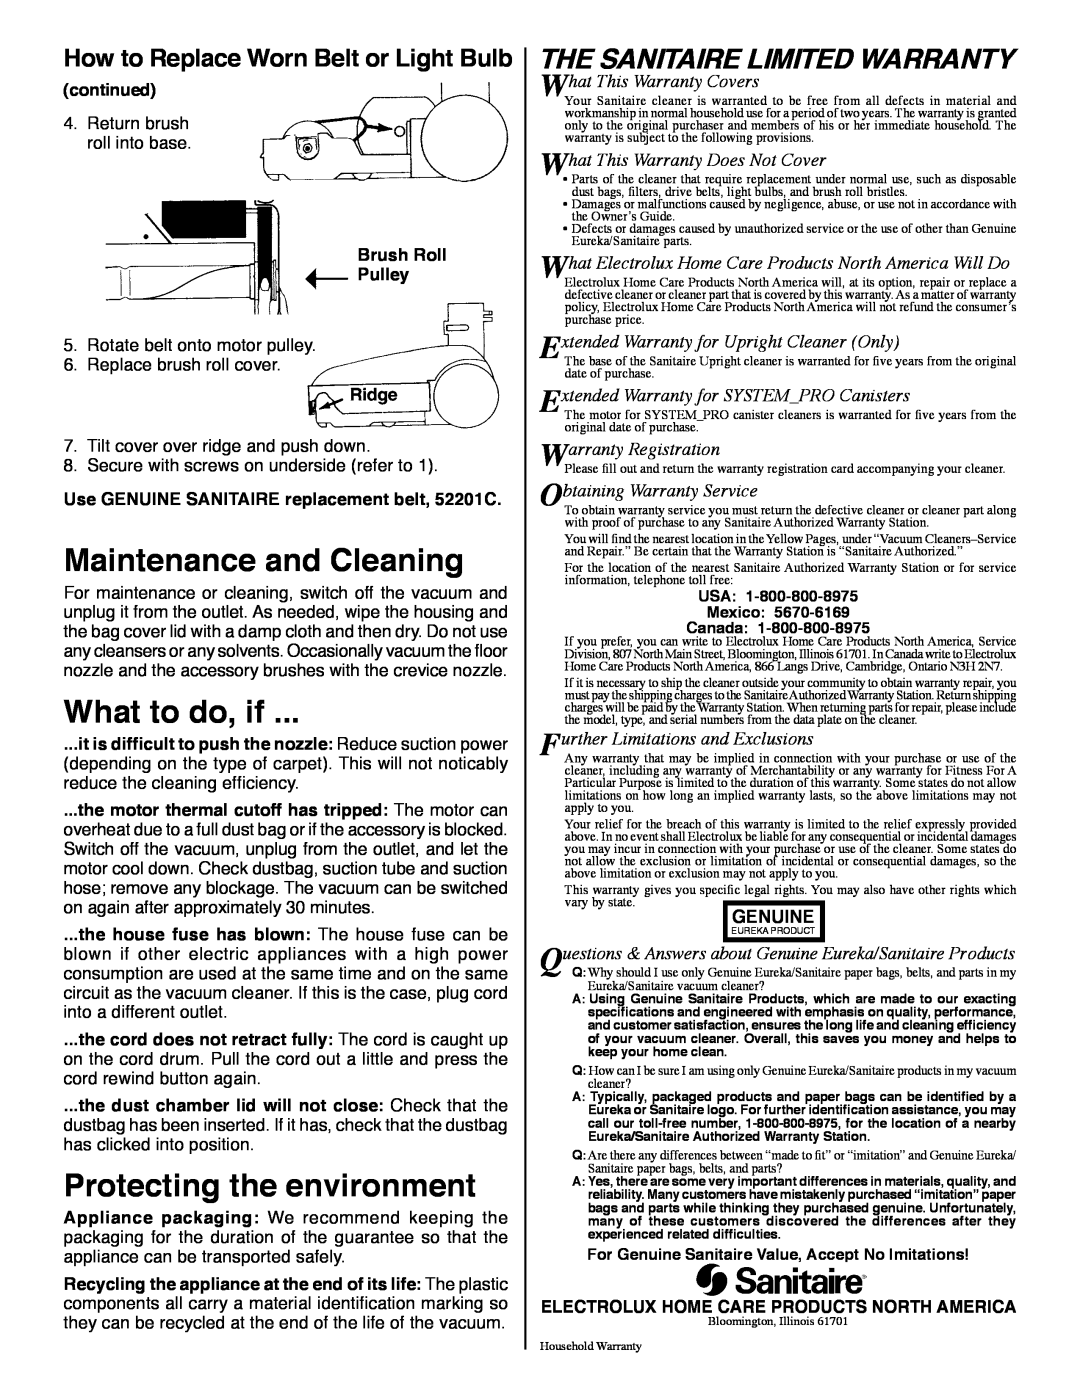 Sanitaire SP6952 Maintenance and Cleaning, What to do, if, Protecting the environment, The Sanitaire Limited Warranty 